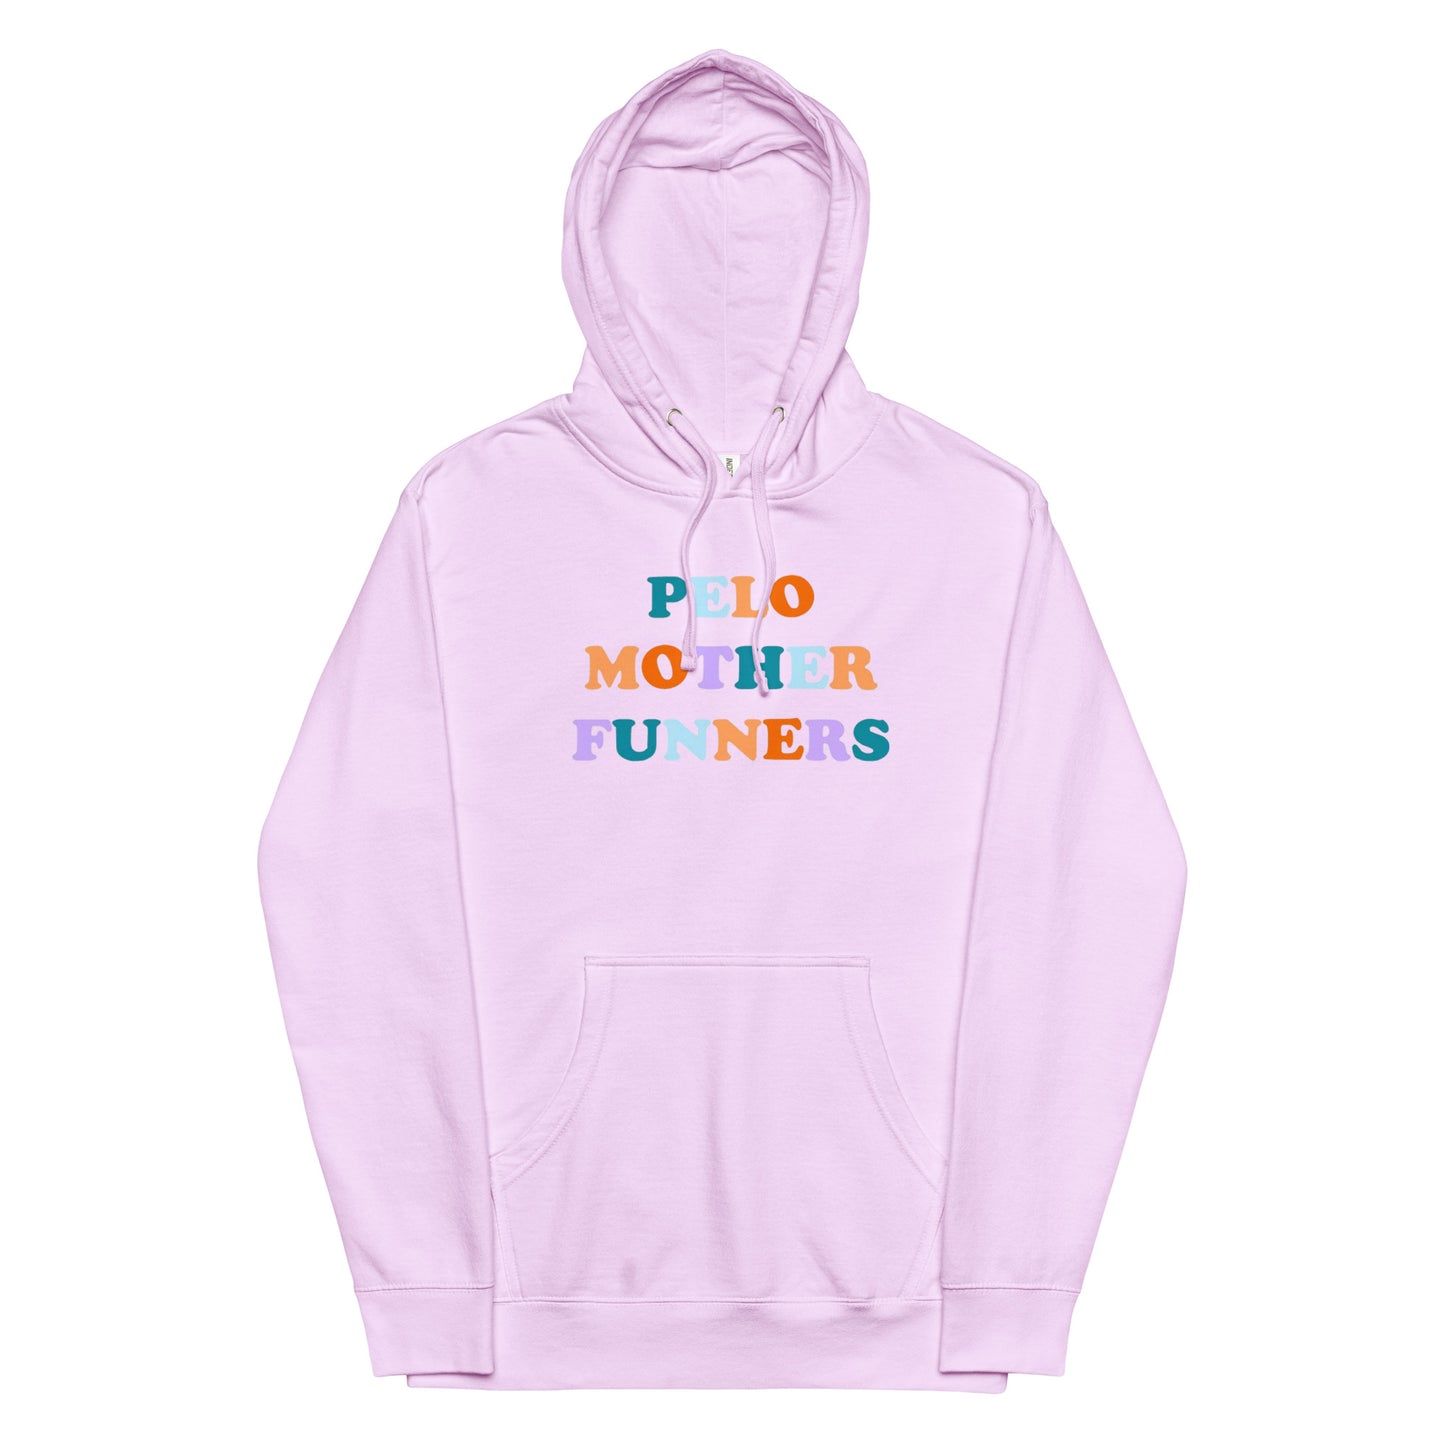 Pelo Mother Funners - Unisex midweight hoodie Independent